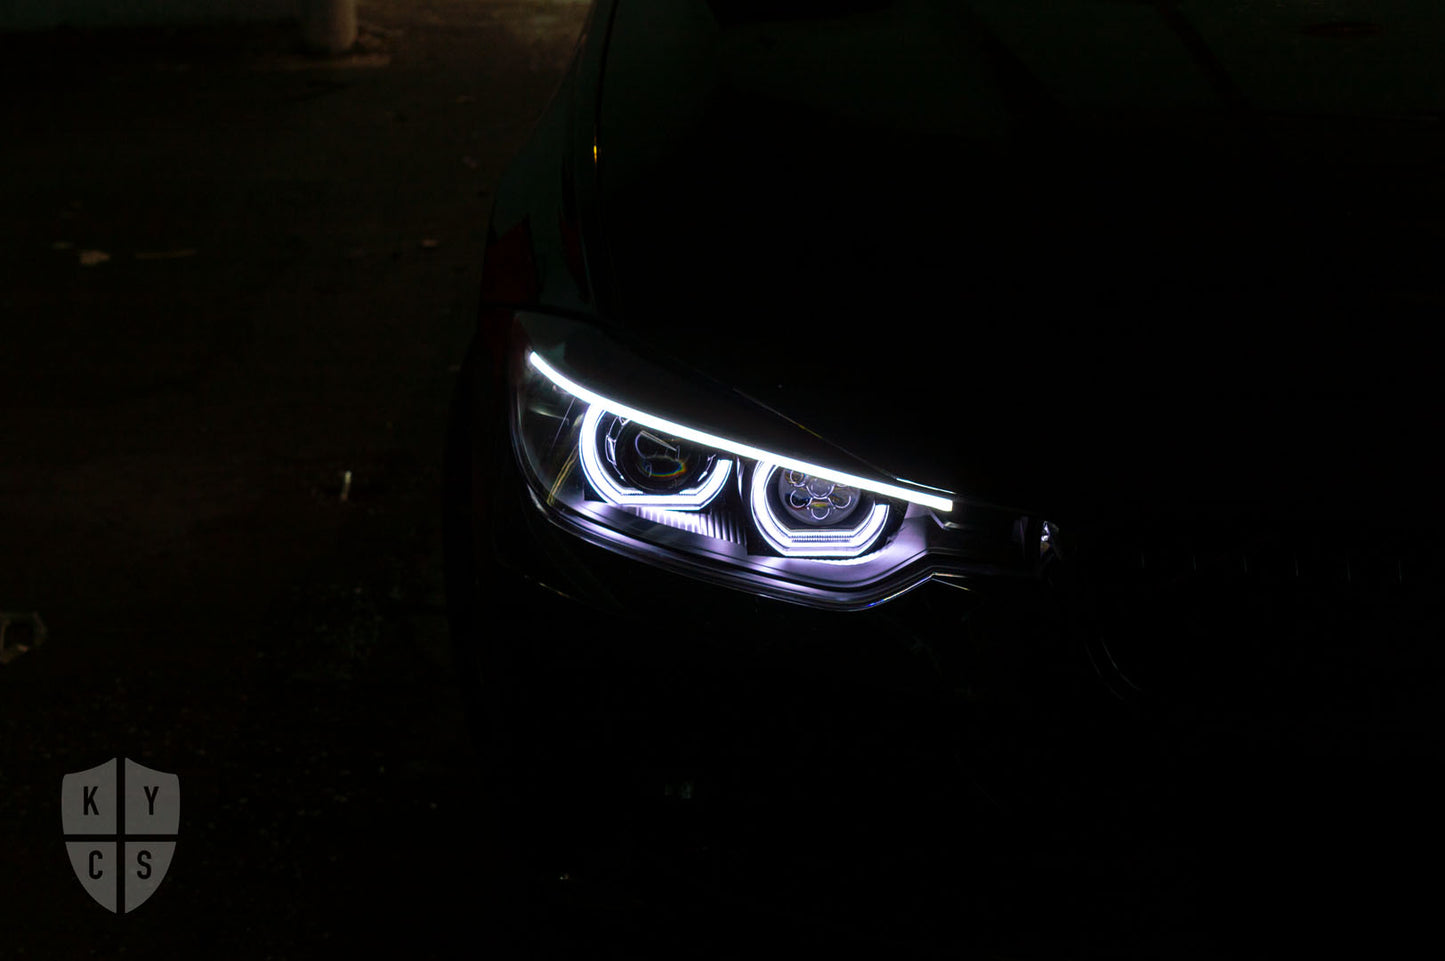 Select the following options to get the same headlights pictured above: BavGruppe Design 3/4 DTM Angel Eyes (White) | Modern Blackout Paintwork | Bi-LED 2.5" Projector With LED Bulb | High Beam LED Unit (Array Style) | LED Eyebrow Strip (Switchback) | New Lenses | LED Indicators